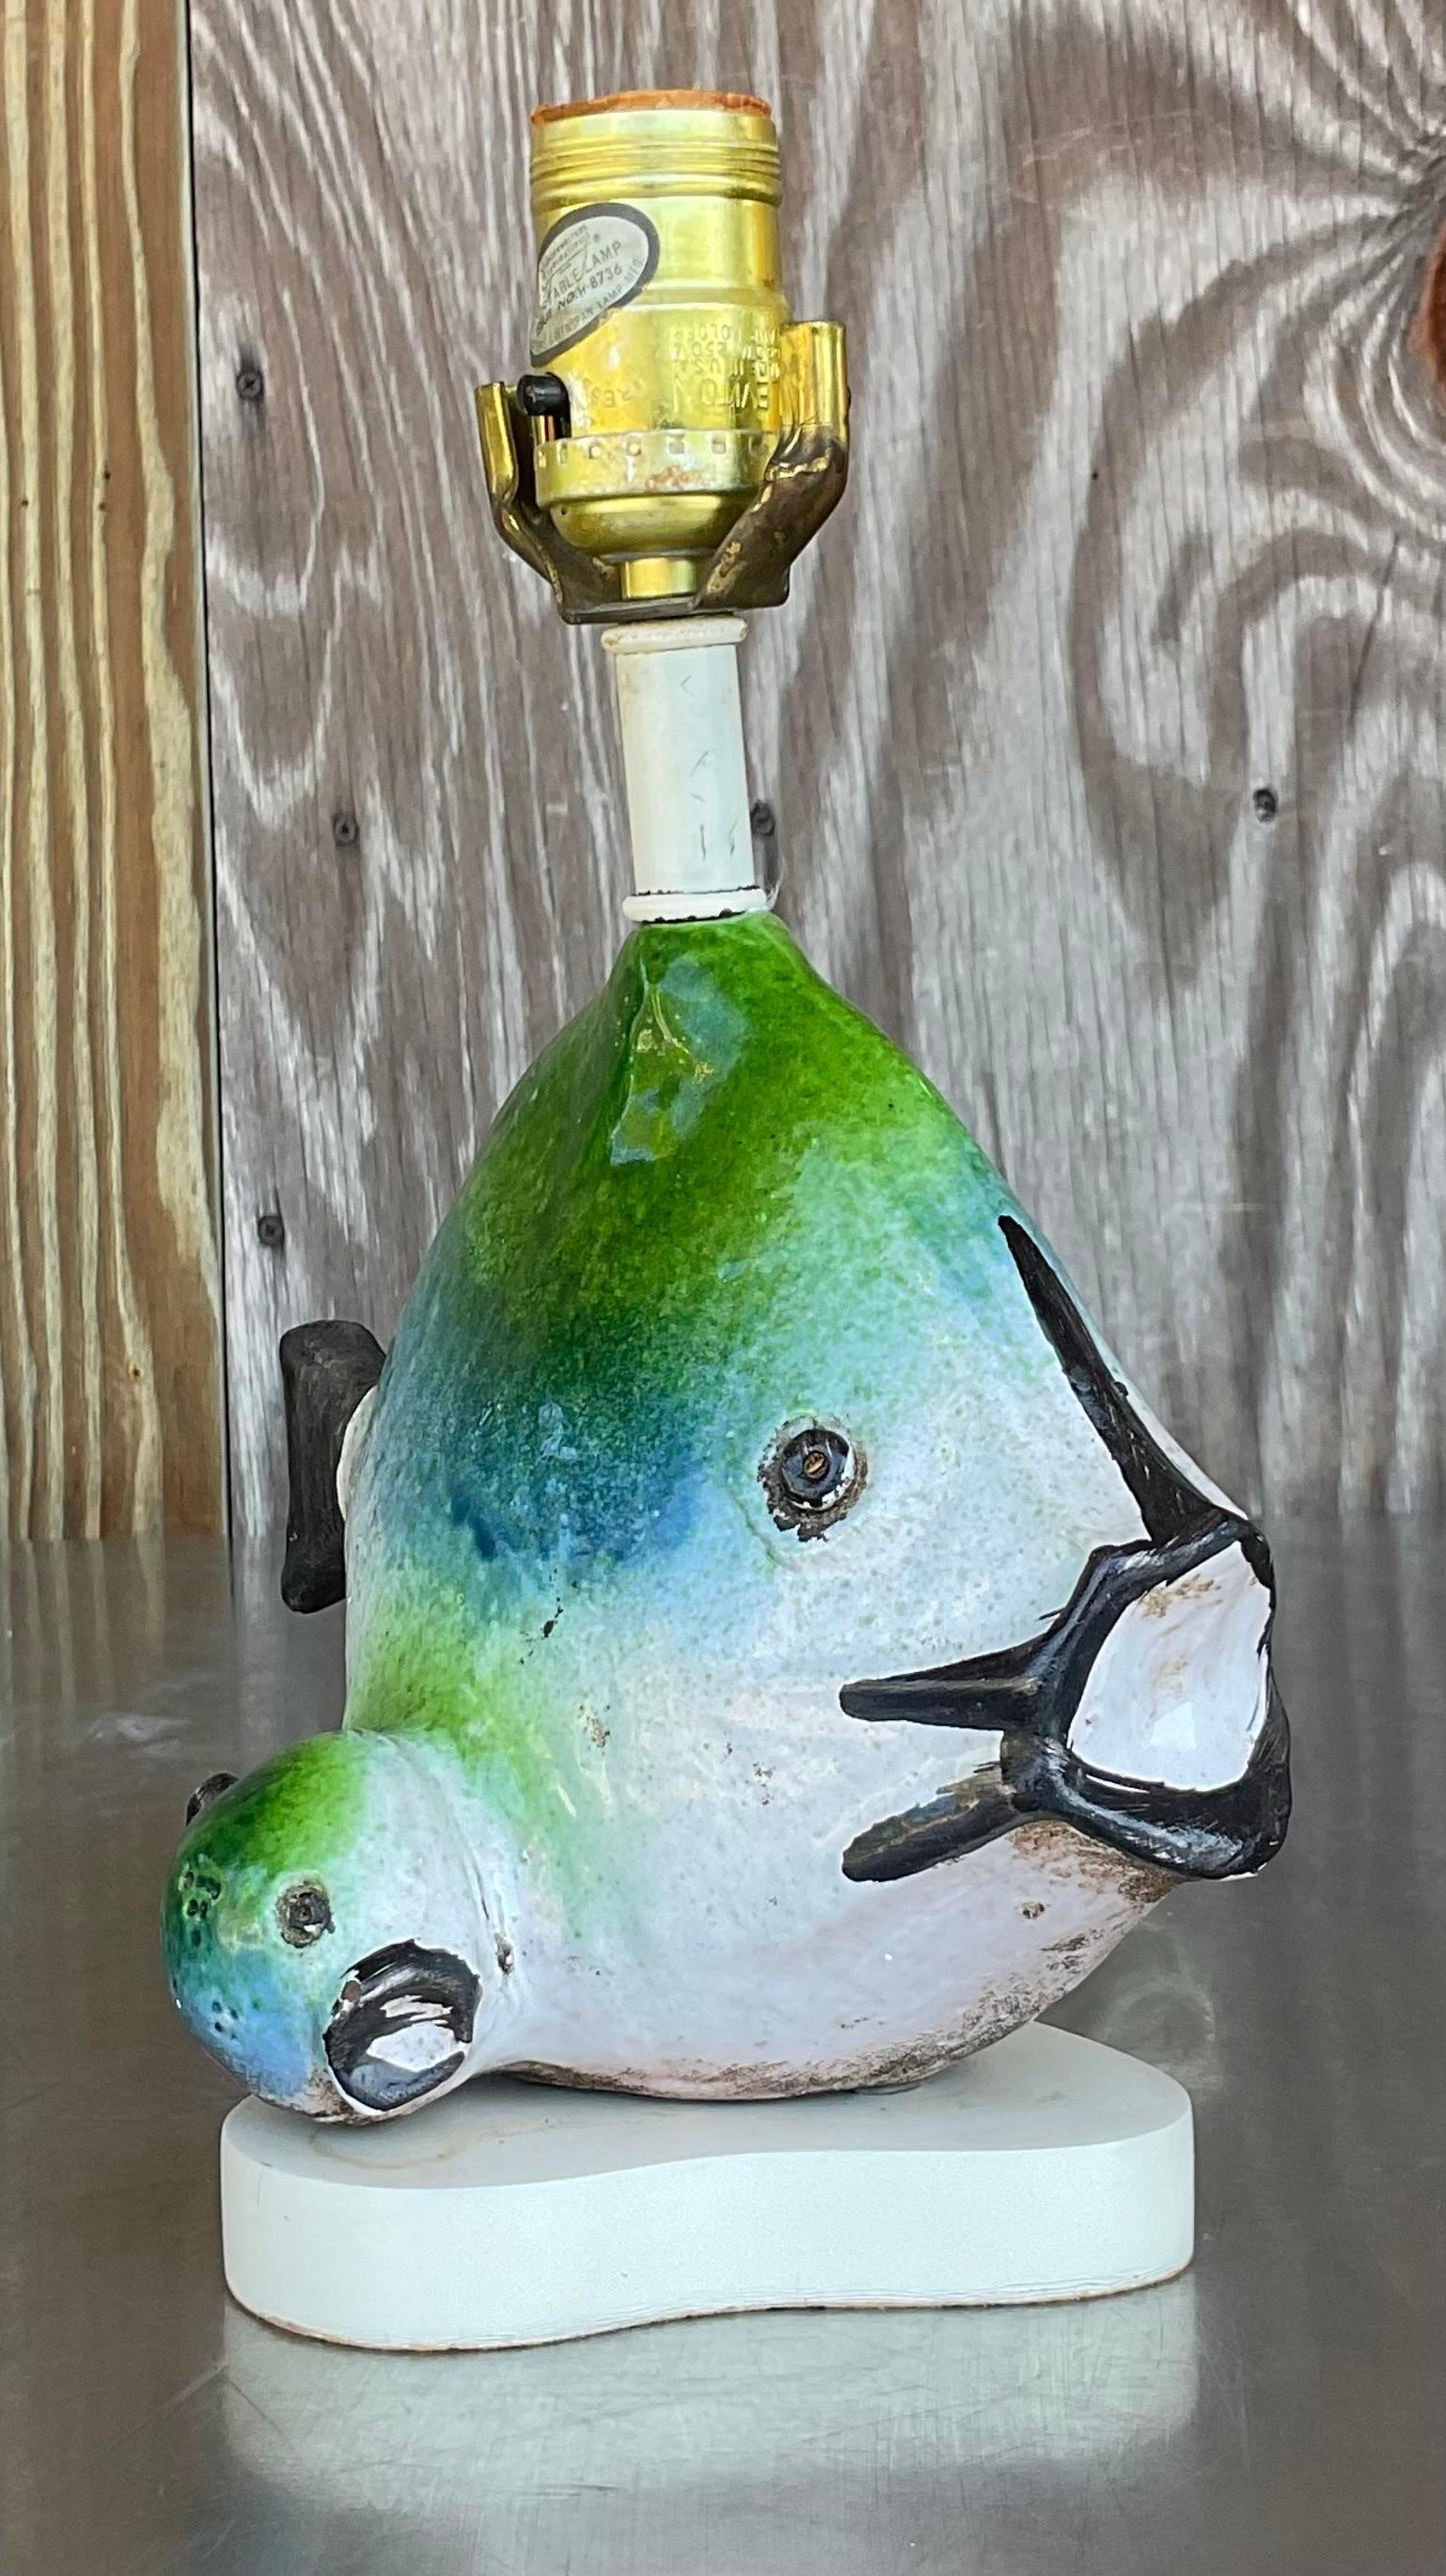 Illuminate your space with the whimsical charm of our Vintage 1960s Italian Gli Etruschi Fish Lamp. This iconic piece evokes the spirit of mid-century American design with its playful yet elegant fish motif. Crafted with exquisite detail, it adds a